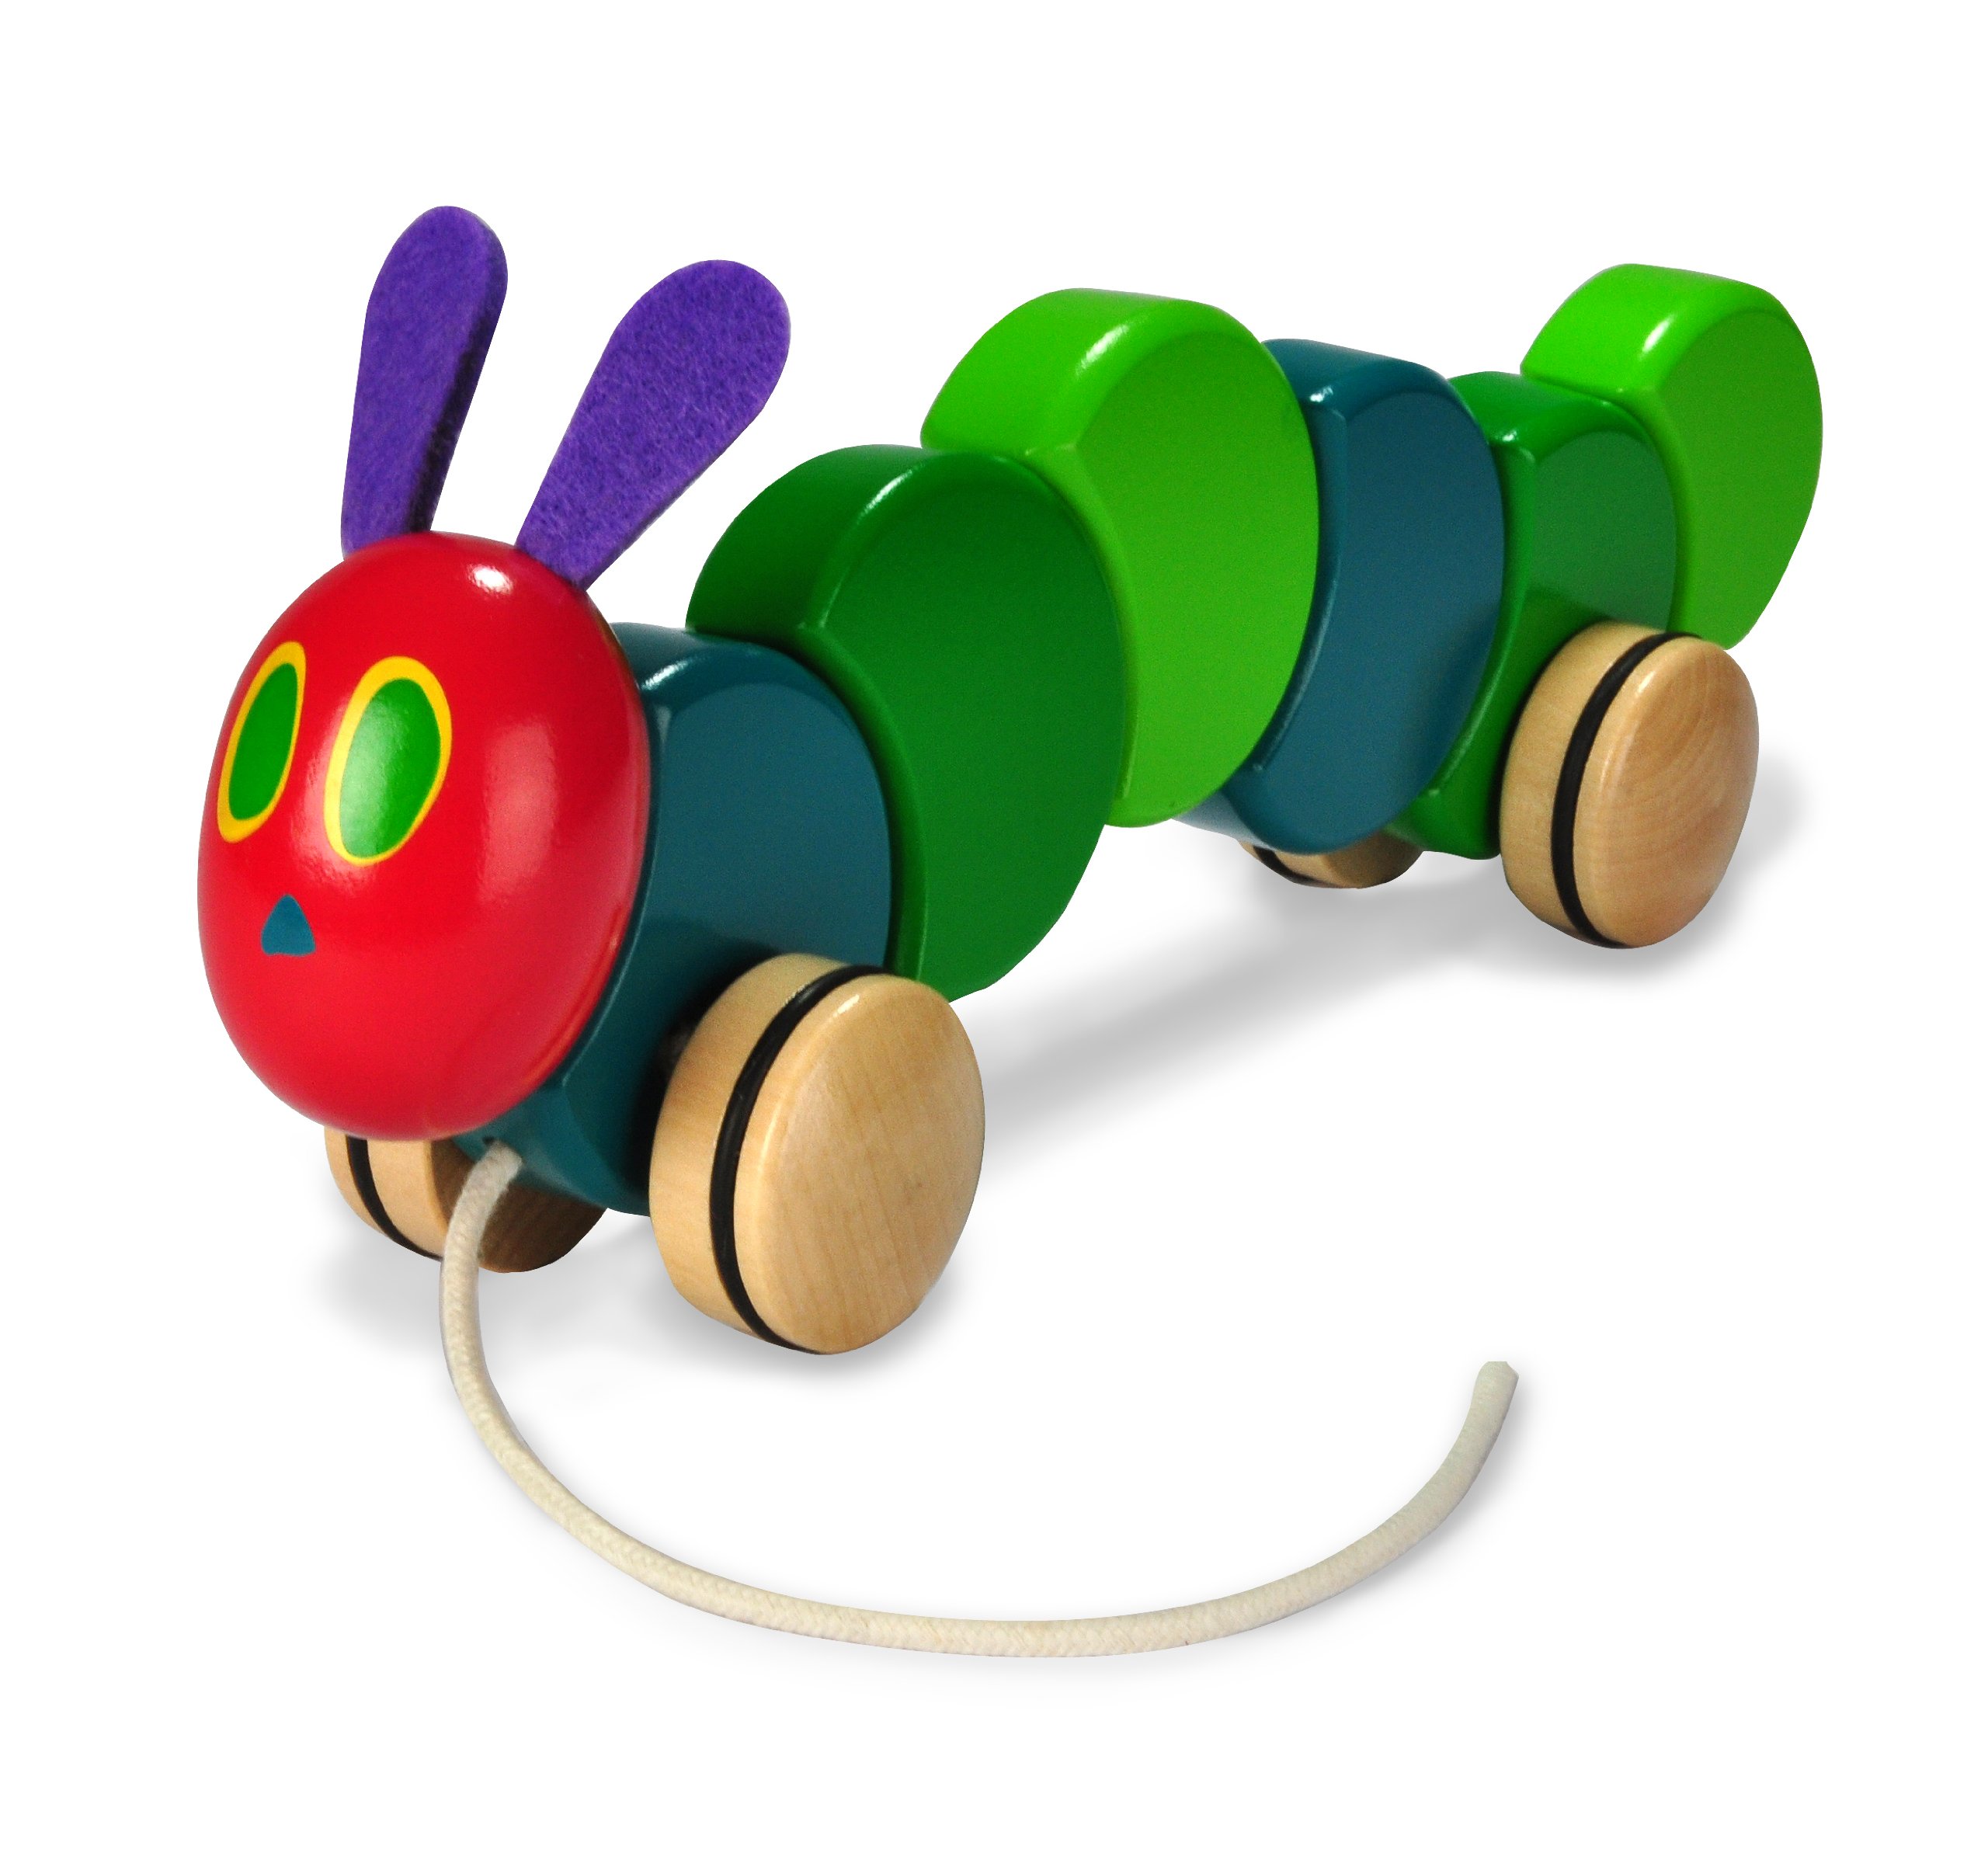 Amazon.com : World of Eric Carle, The Very Hungry Caterpillar Wood ...